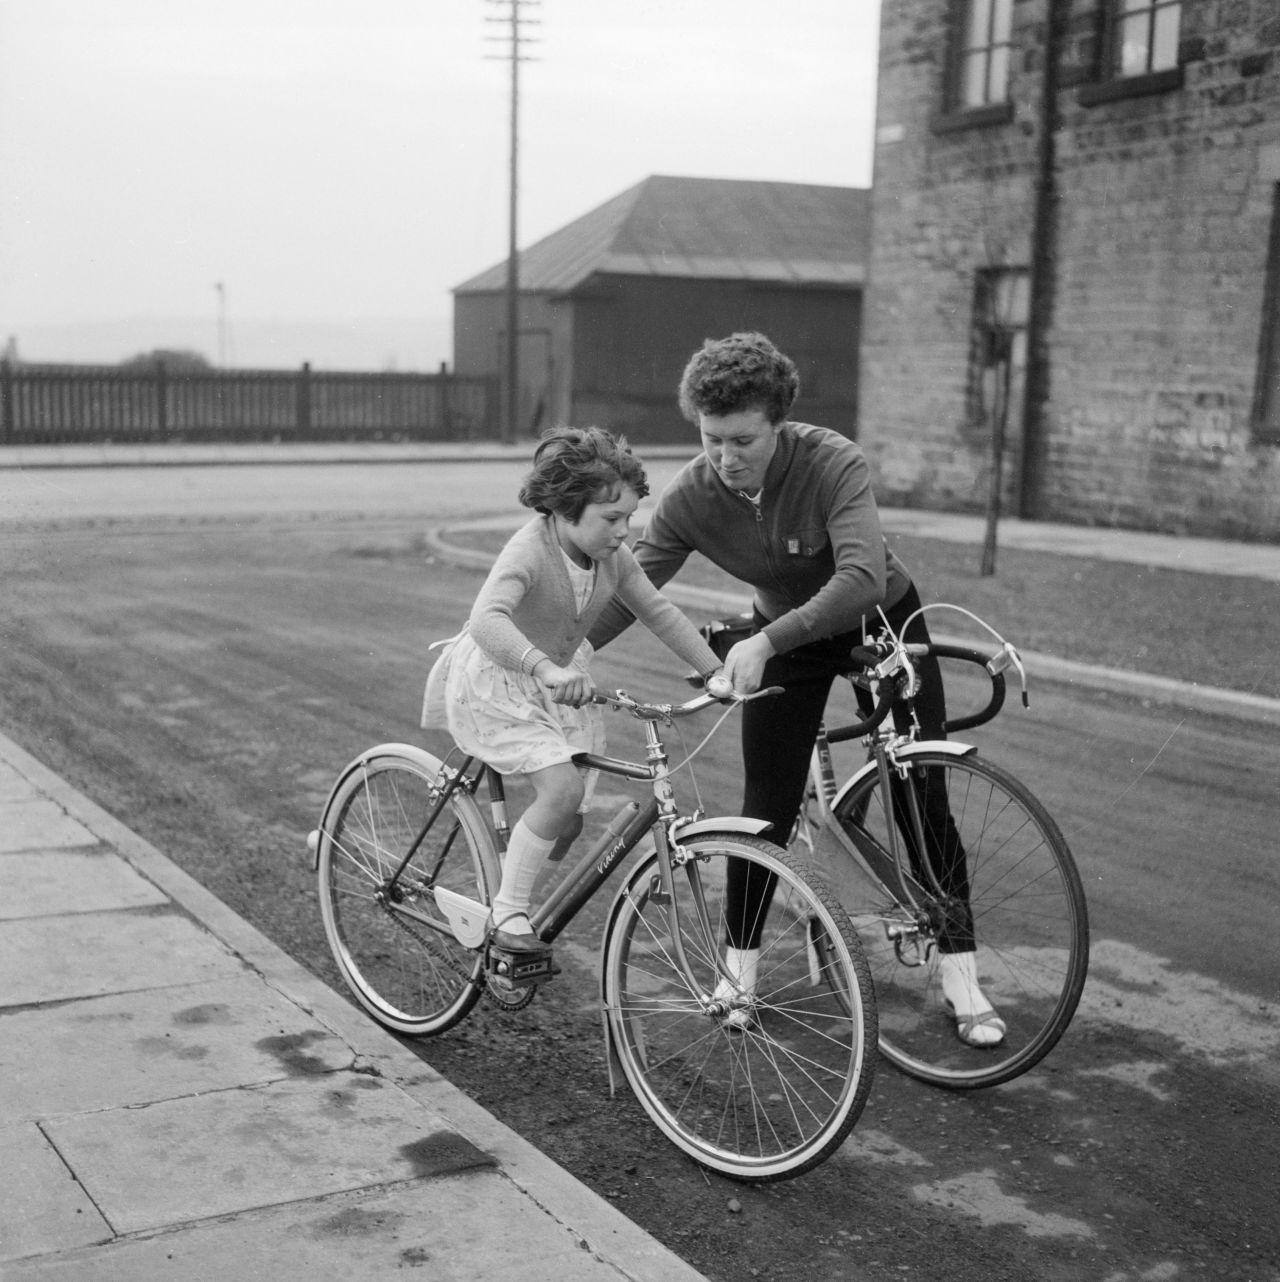 British cyclist Beryl Burton beat all competitors, including men, in a 12-hour continuous cycle race in Otley, West Yorkshire, in 1967. Mother and daughter, pictured in 1963, later raced together in the 1972 world championships. 